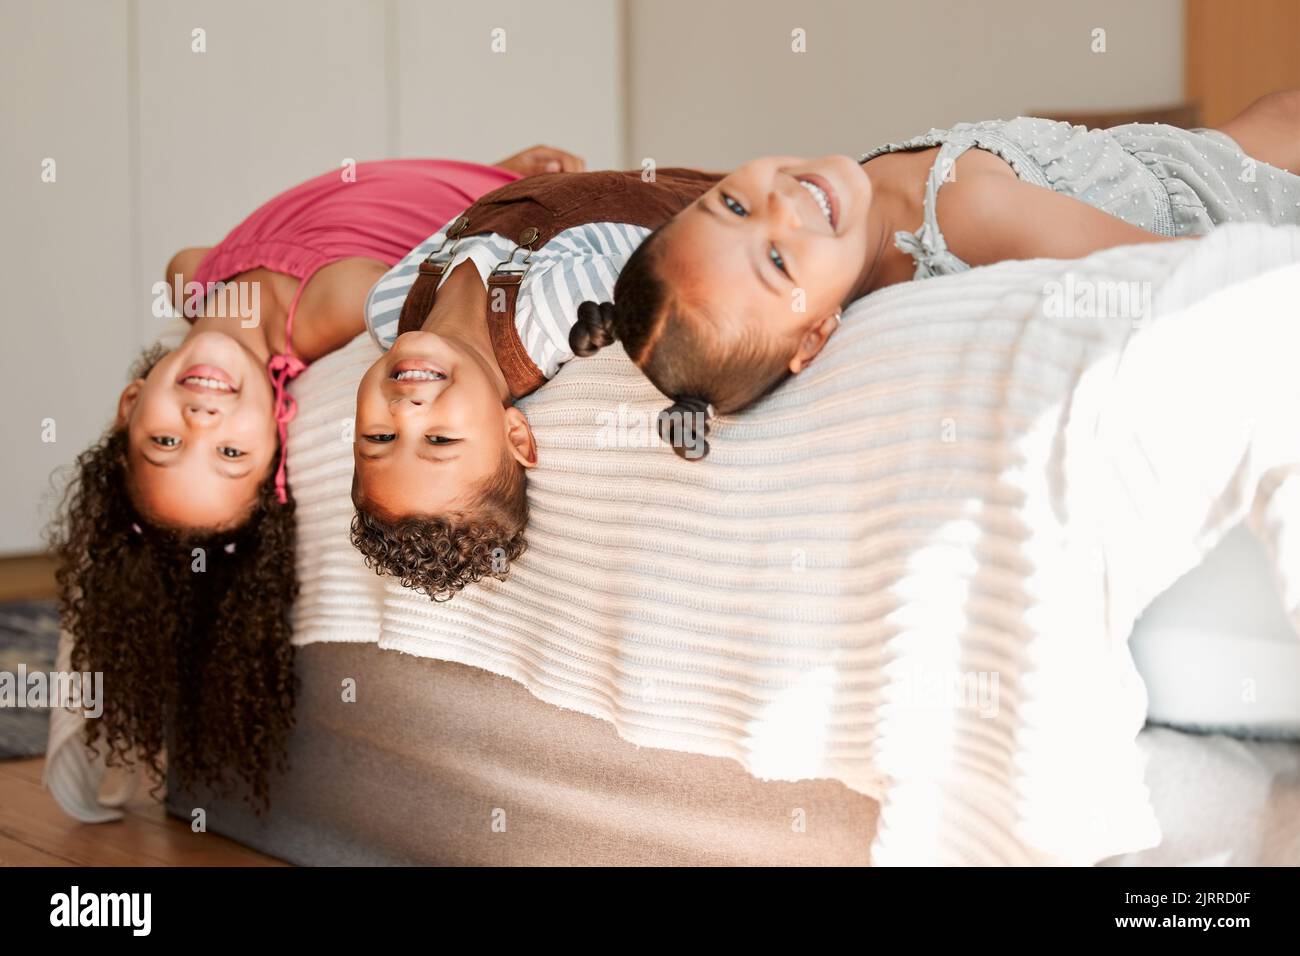 Fun, playful and silly kids lying on a bed with cute hairstyle and smiling portrait. Little siblings relaxing, playing indoors showing growth, child Stock Photo